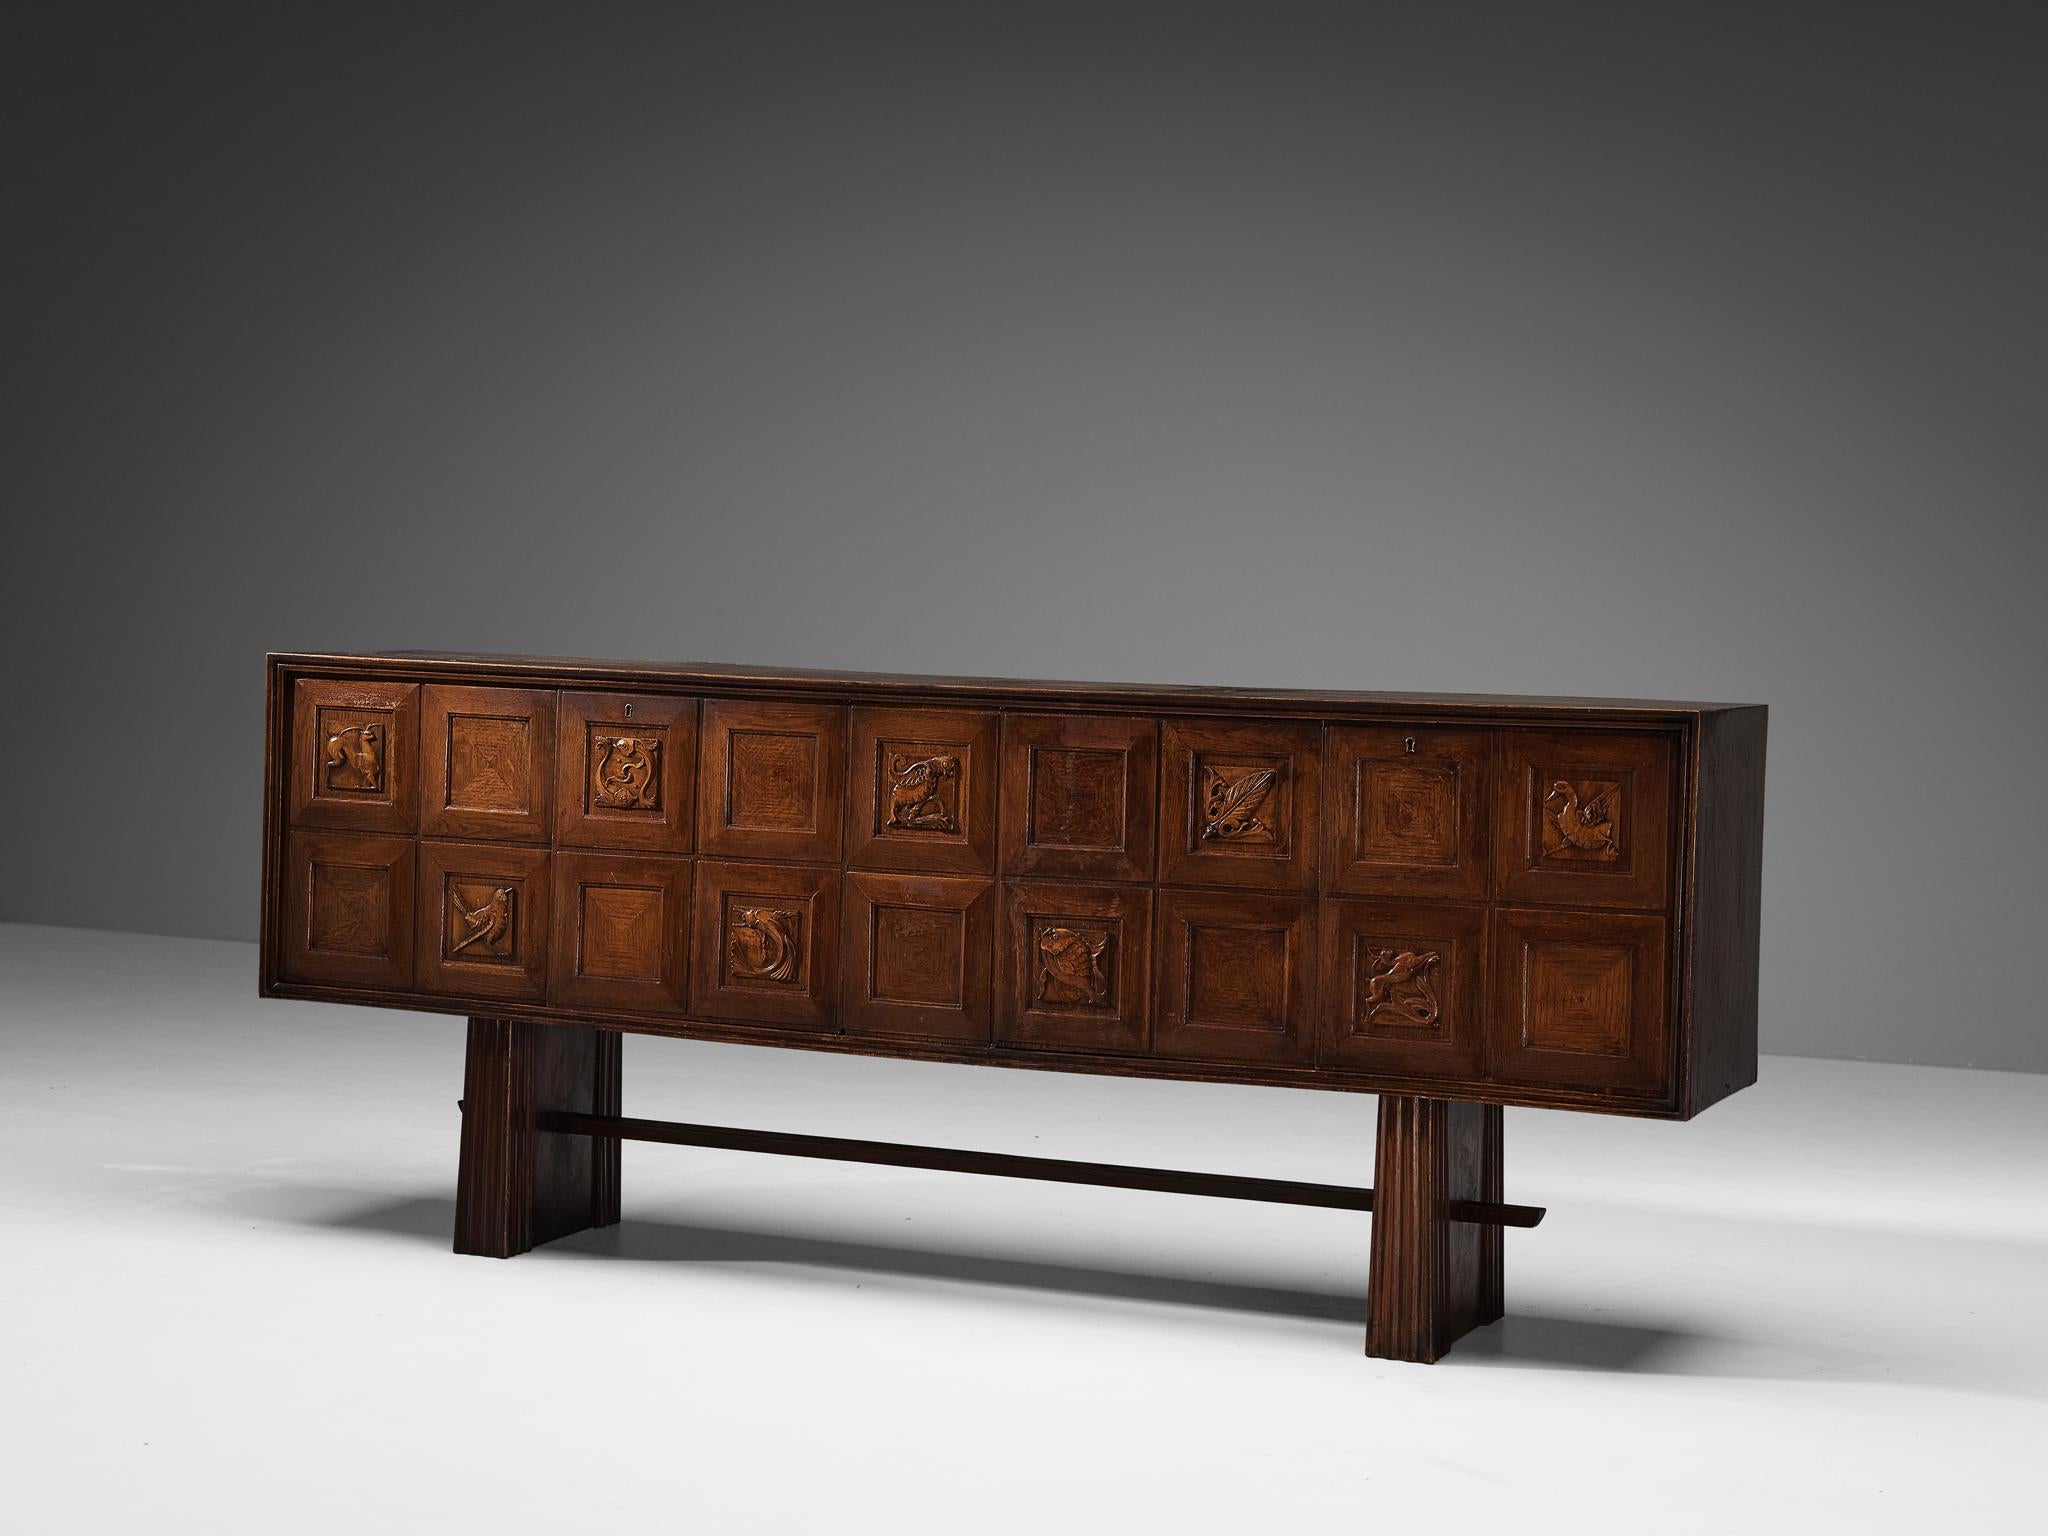 Pier Luigi Colli, sideboard, oak, Italy, 1940s

This exquisite credenza, a creation of the Italian designer Pier Luigi Colli, embodies both elegance and exceptional craftsmanship. The front facade of this masterpiece comprises eighteen panels, each